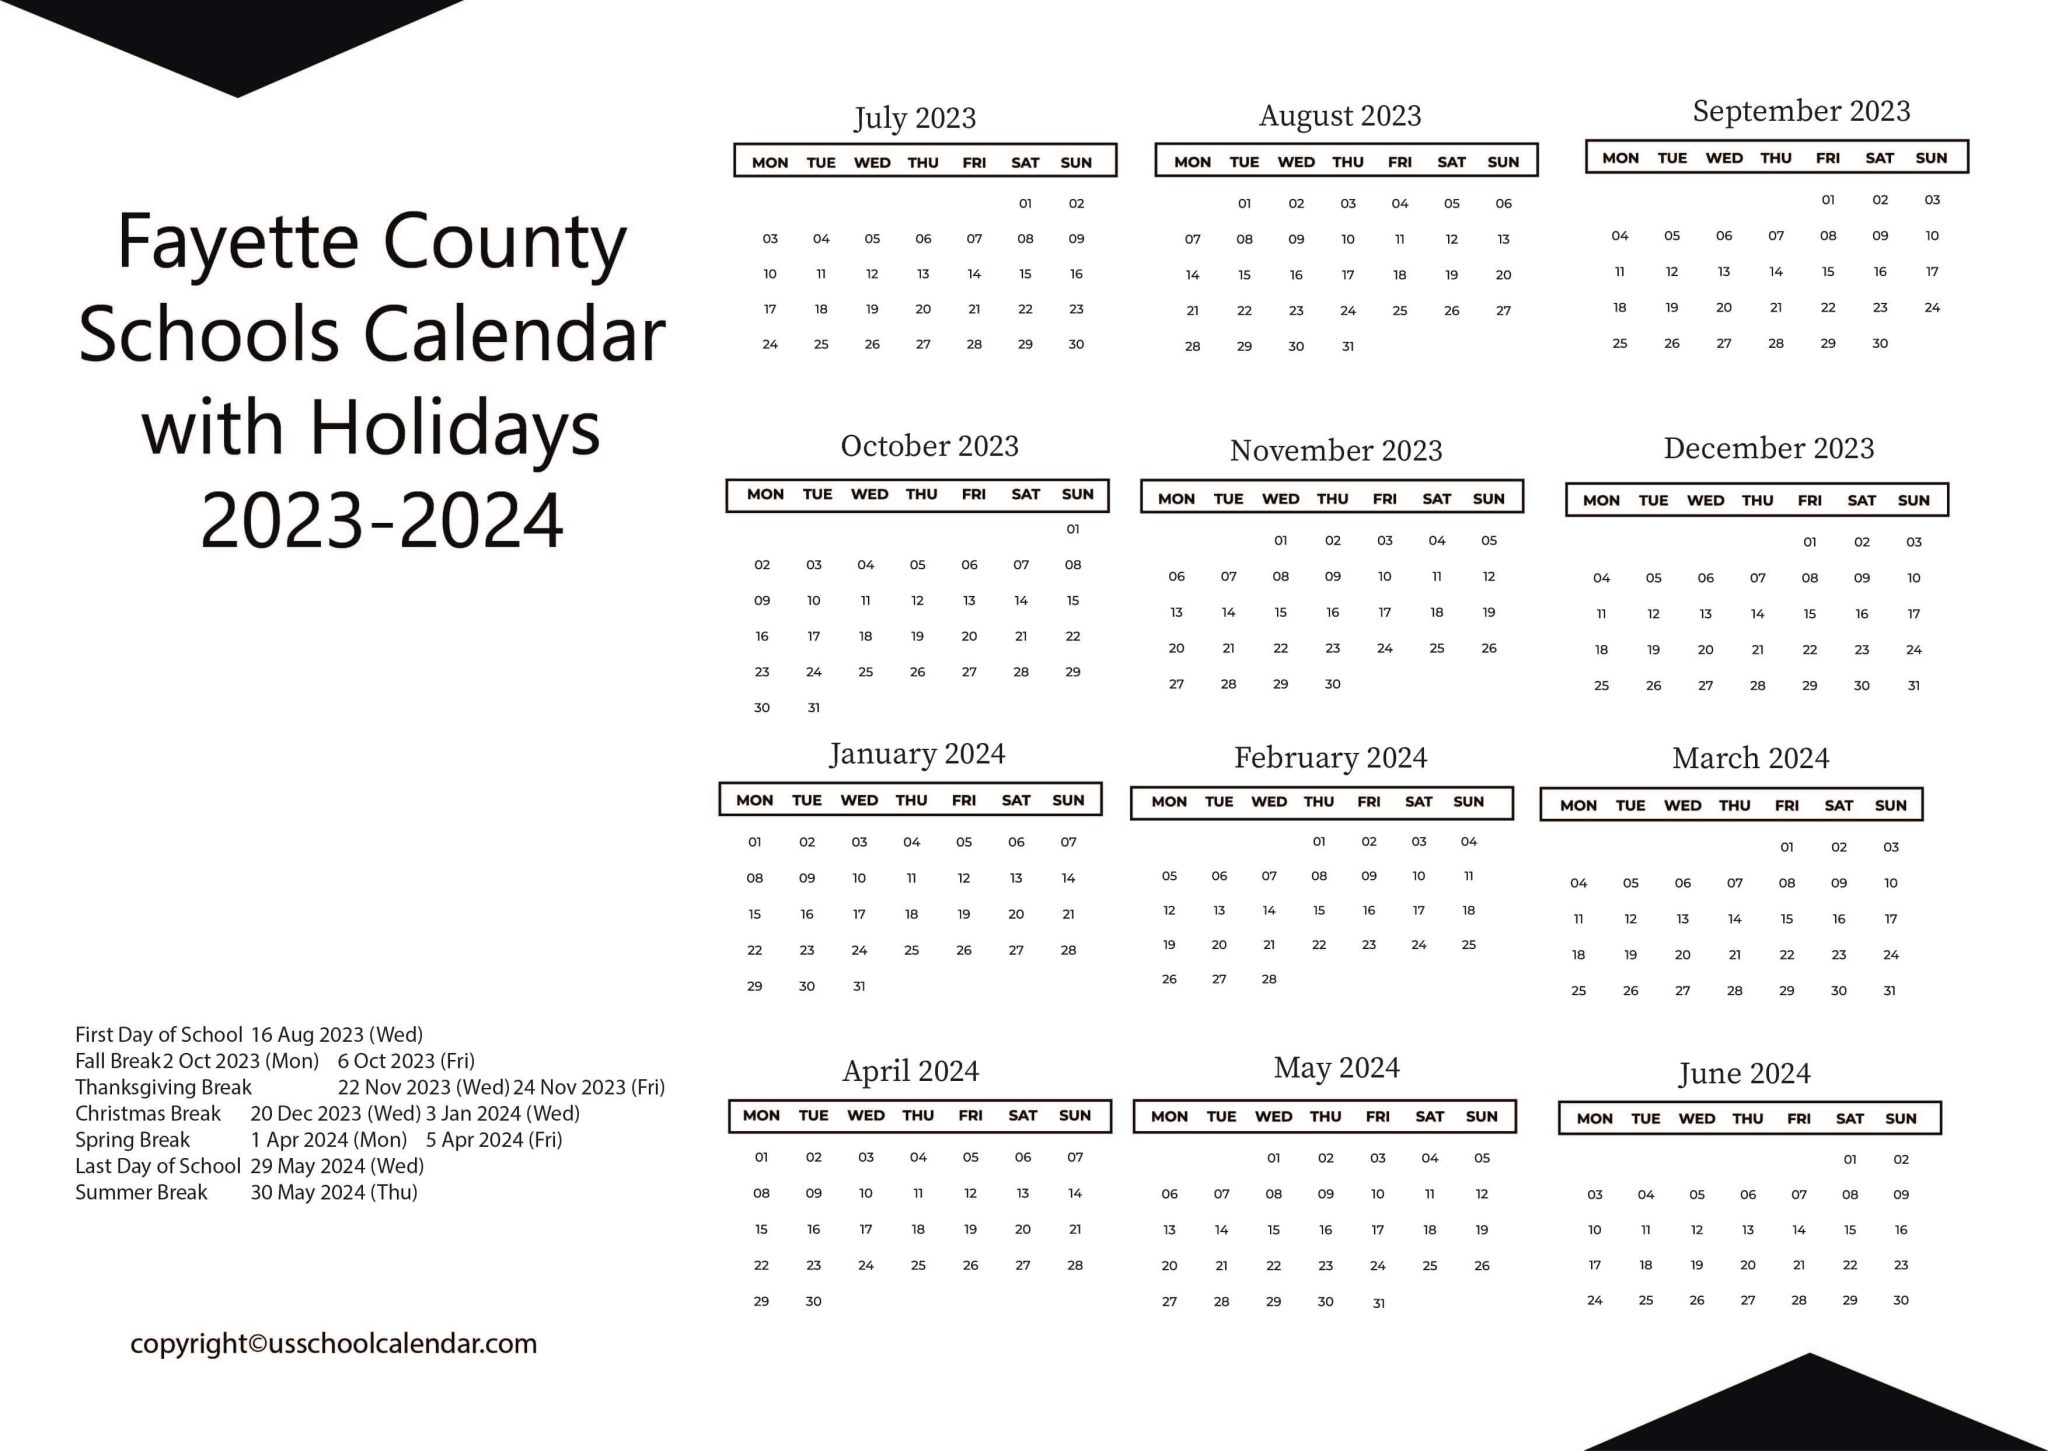 Fayette County Schools Calendar with Holidays 2023 2024